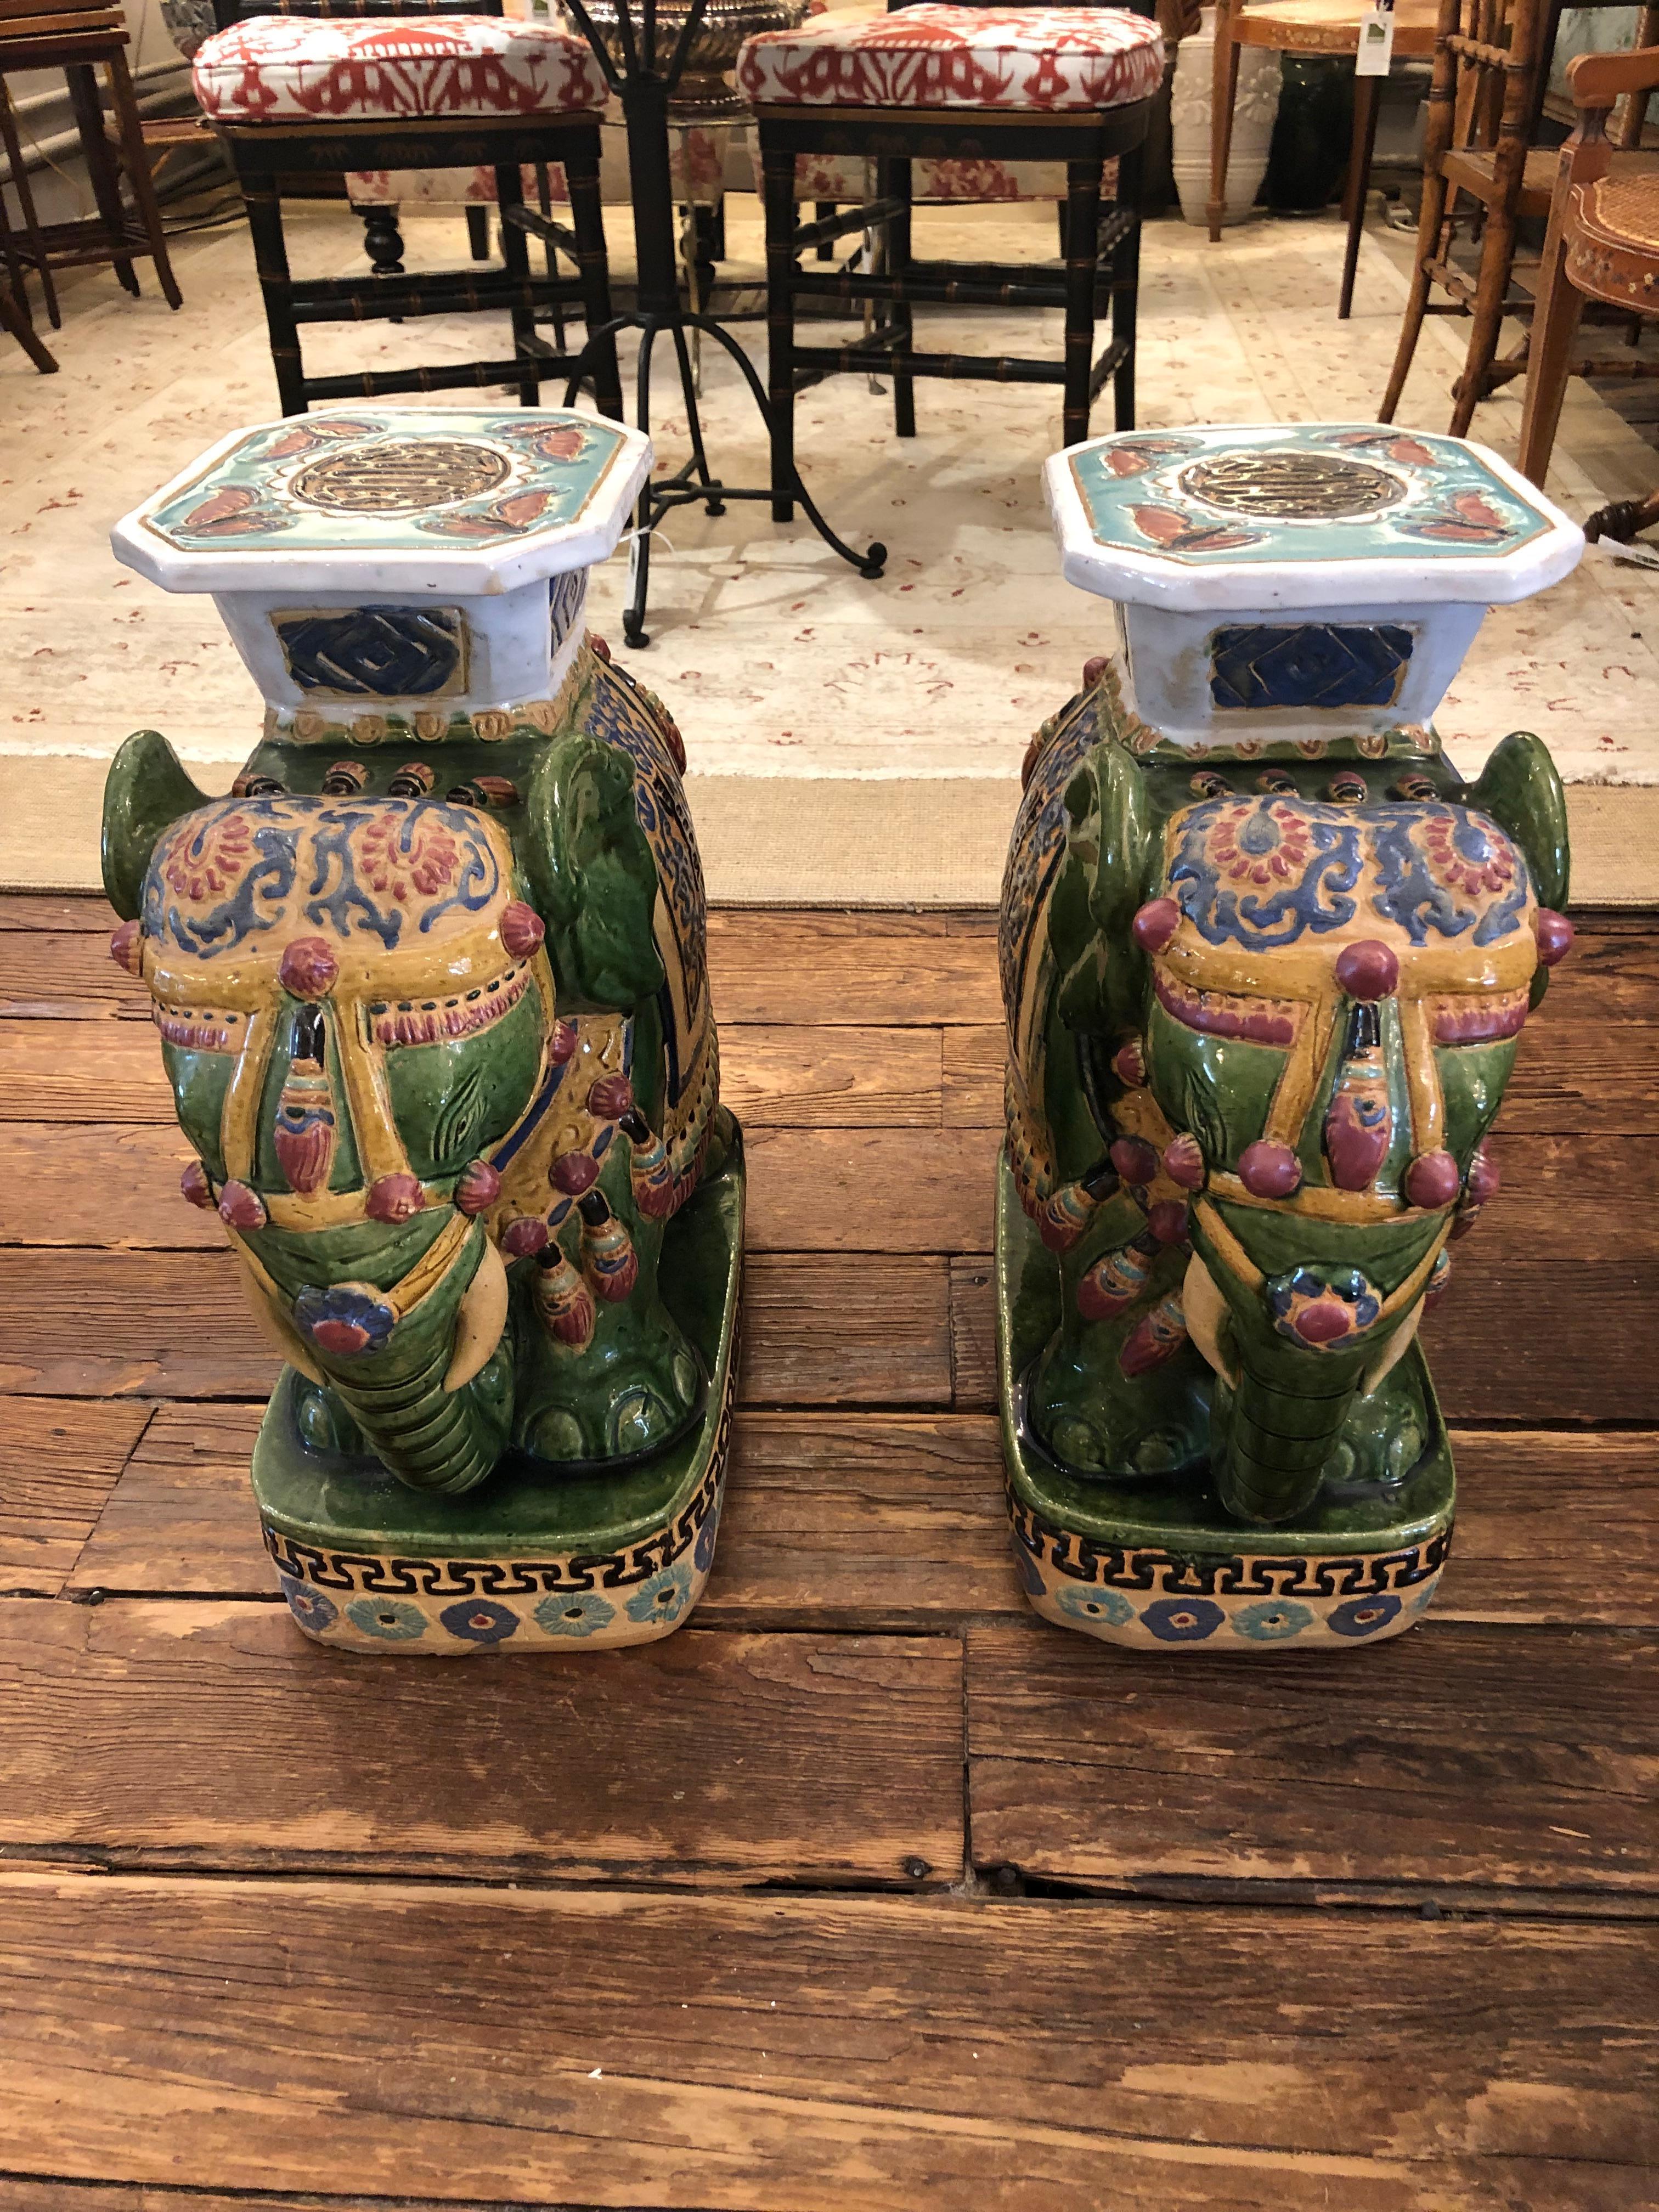 Gorgeous rare pair of vintage ceramic elephant form garden seat tables in marvelous colors including moss green, prussian blue, beige, mauve and turquoise.  Surface on top 9.25 x 7.75